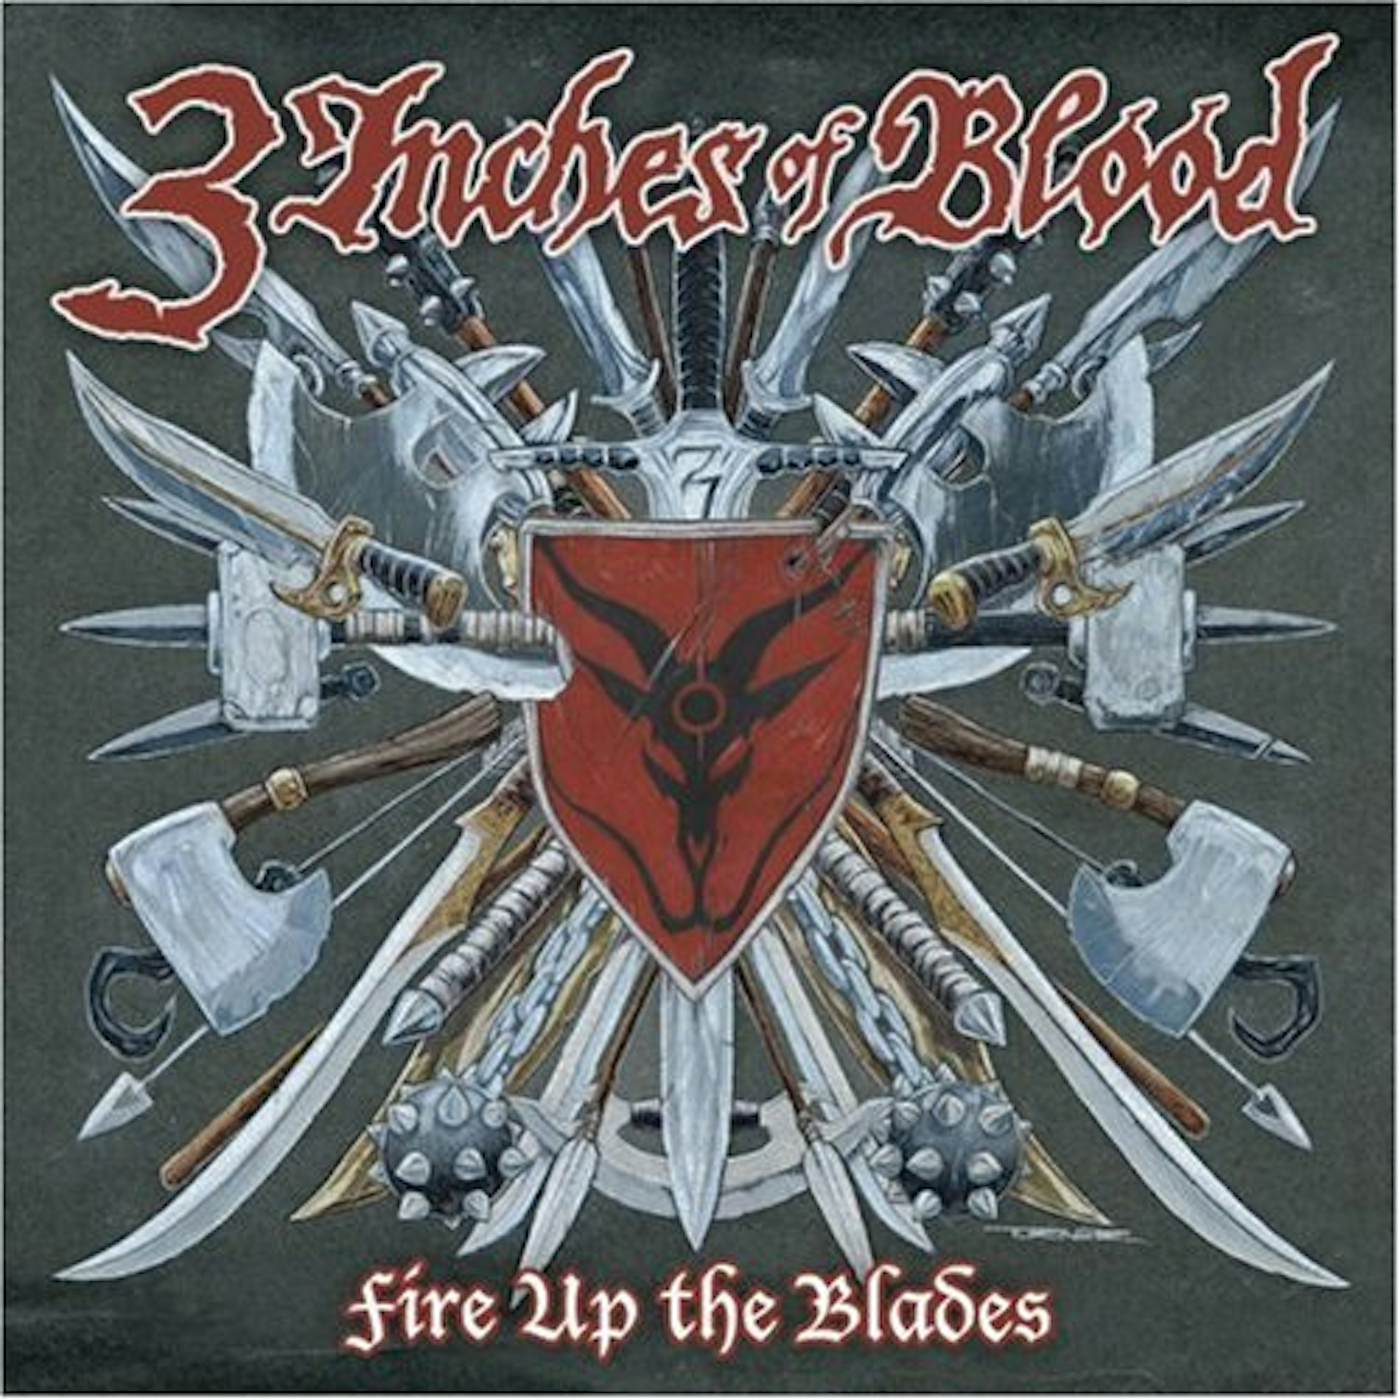 3 Inches Of Blood FIRE UP THE BLADES CD